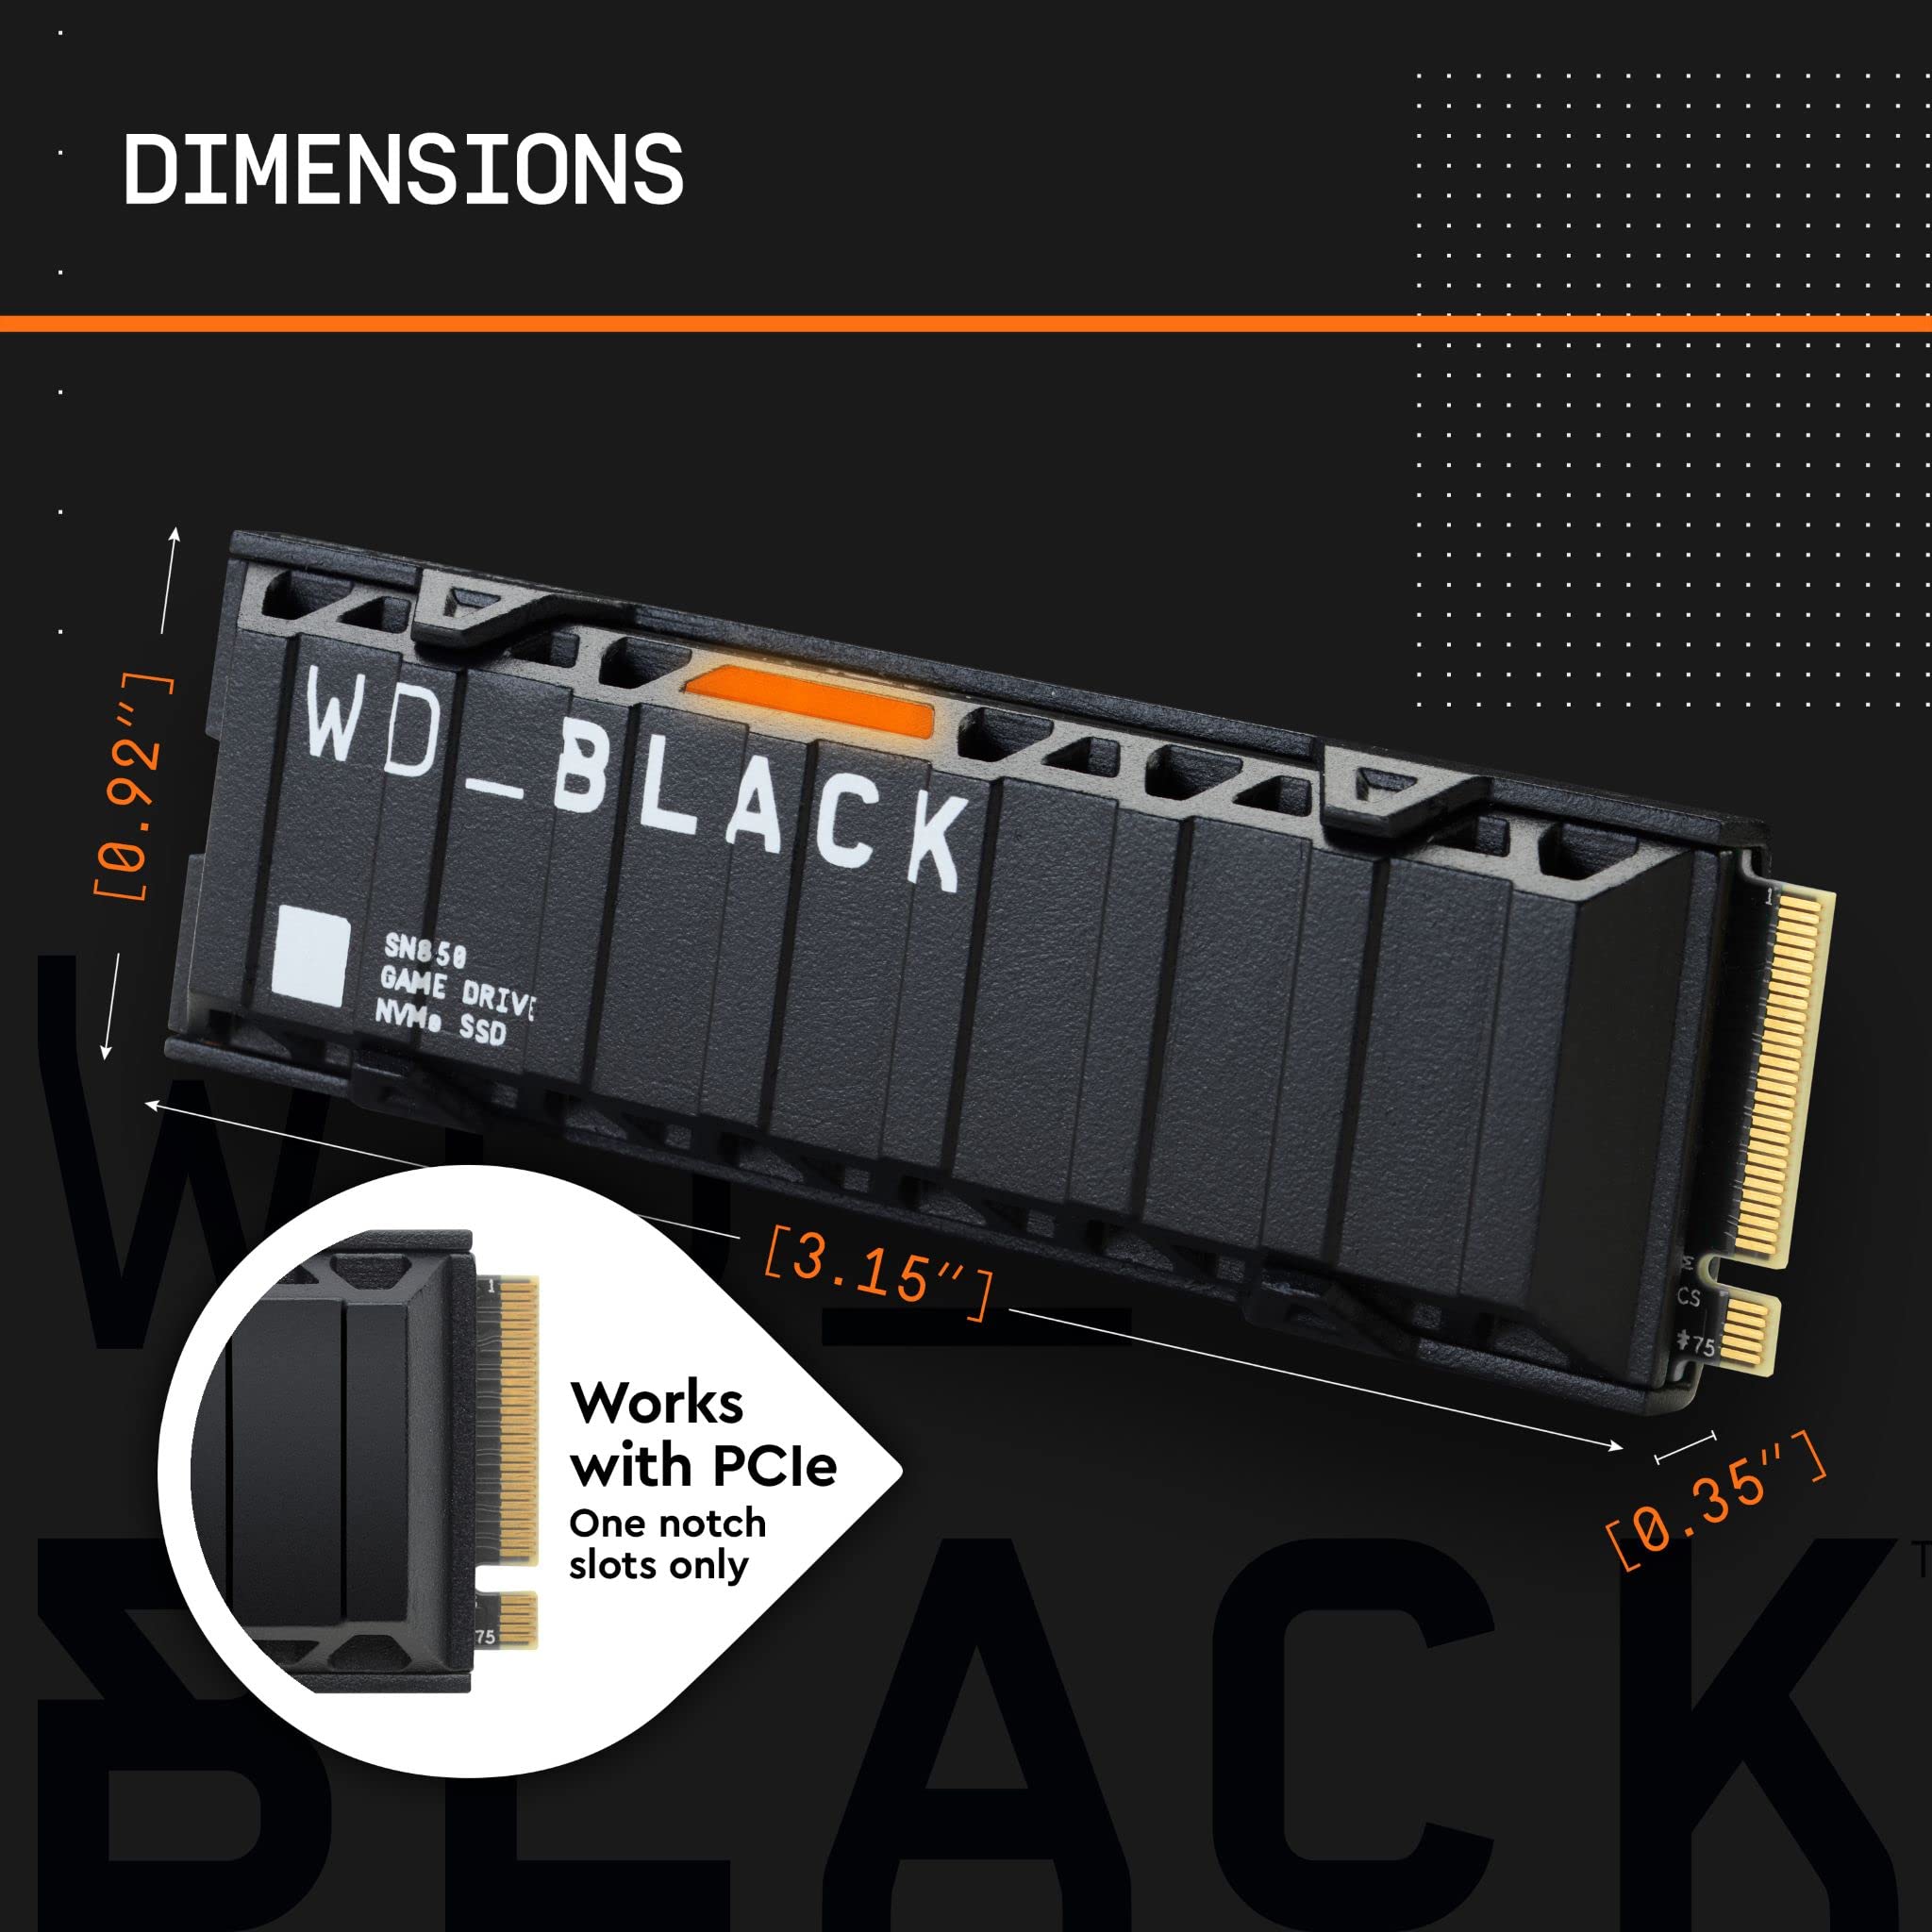 WD_BLACK SN850 500GB M.2 2280 PCIe Gen4 NVMe Gaming SSD with Heatsink - Works with PlayStation 5 up to 7000 MB/s read speed